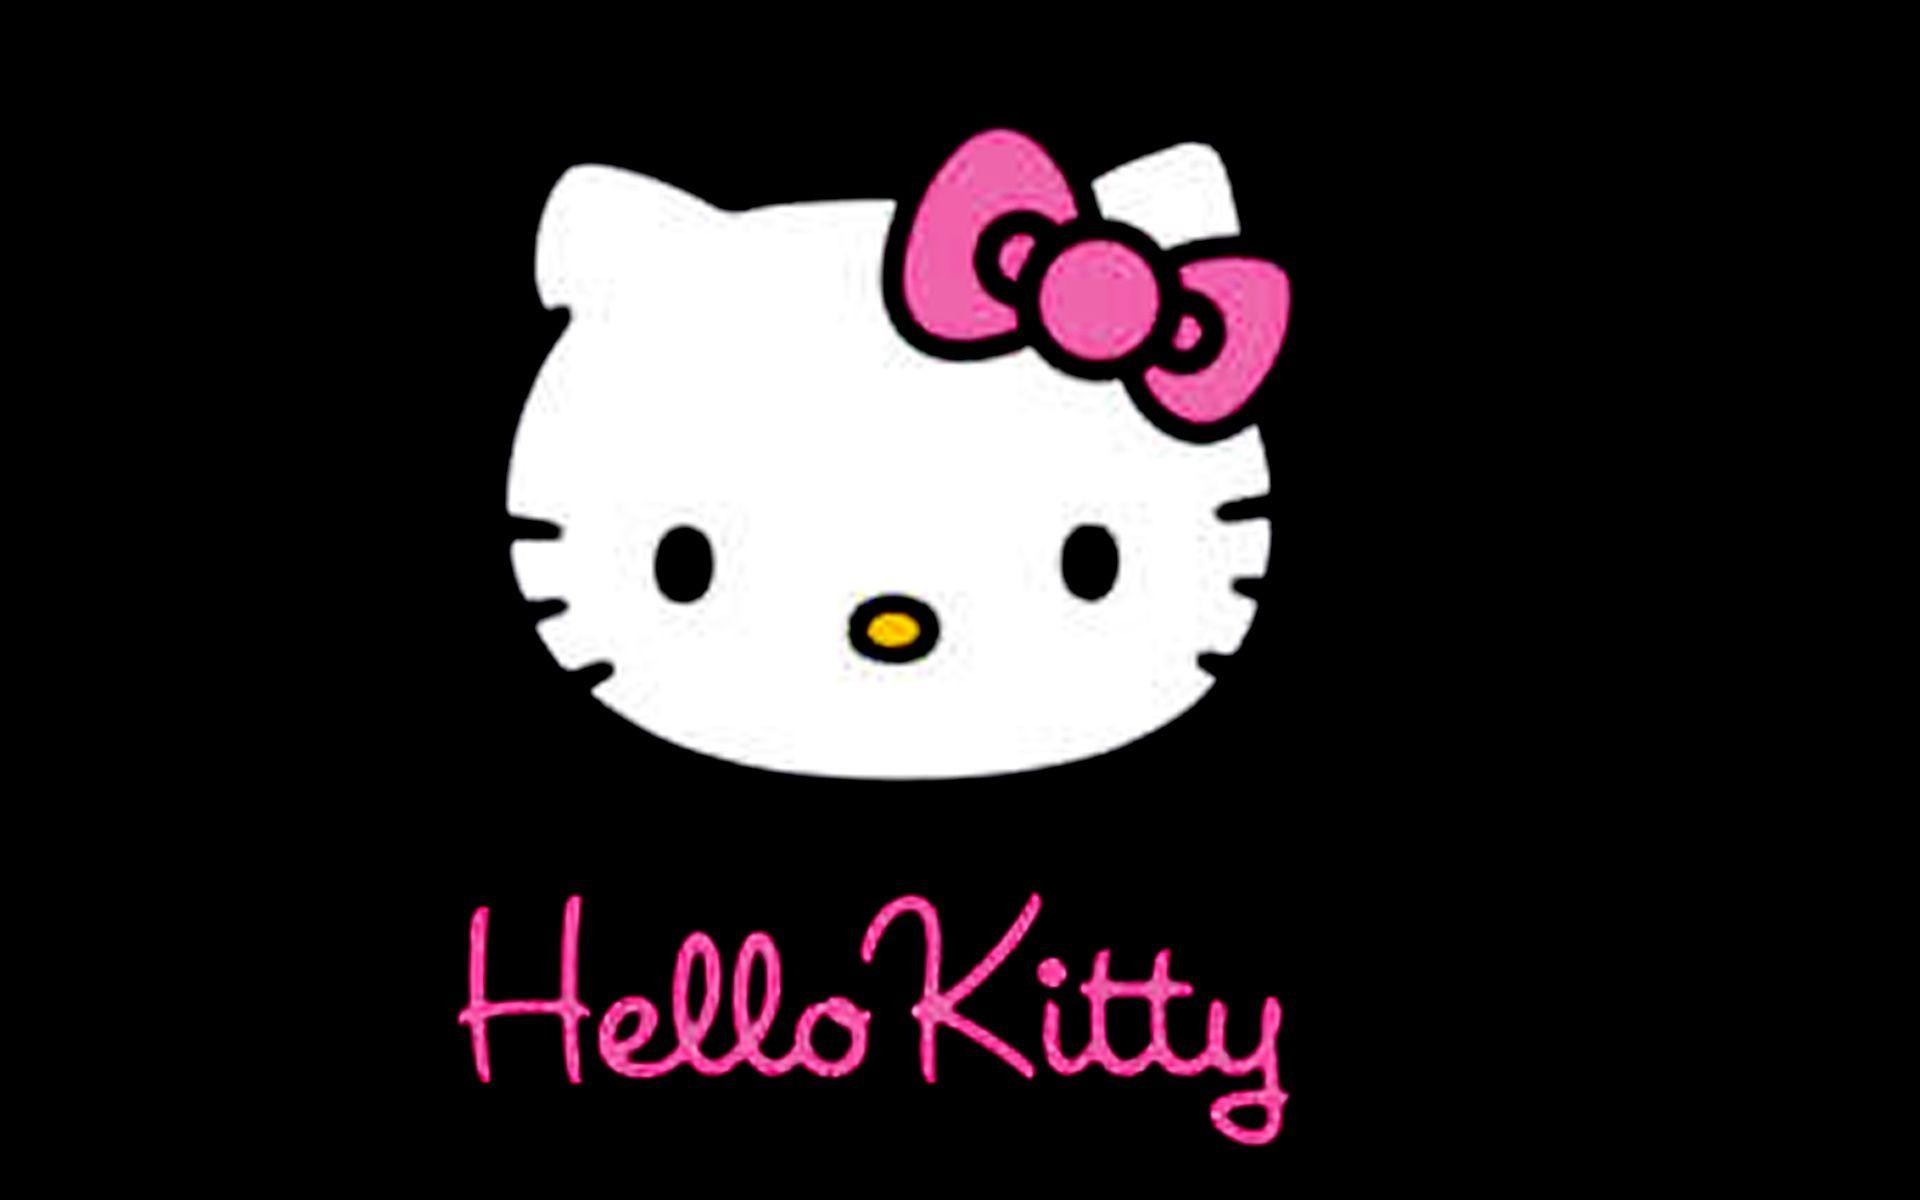 Wallpapers Pink Hello Kitty - Wallpaper Cave, hello kitty wallpaper